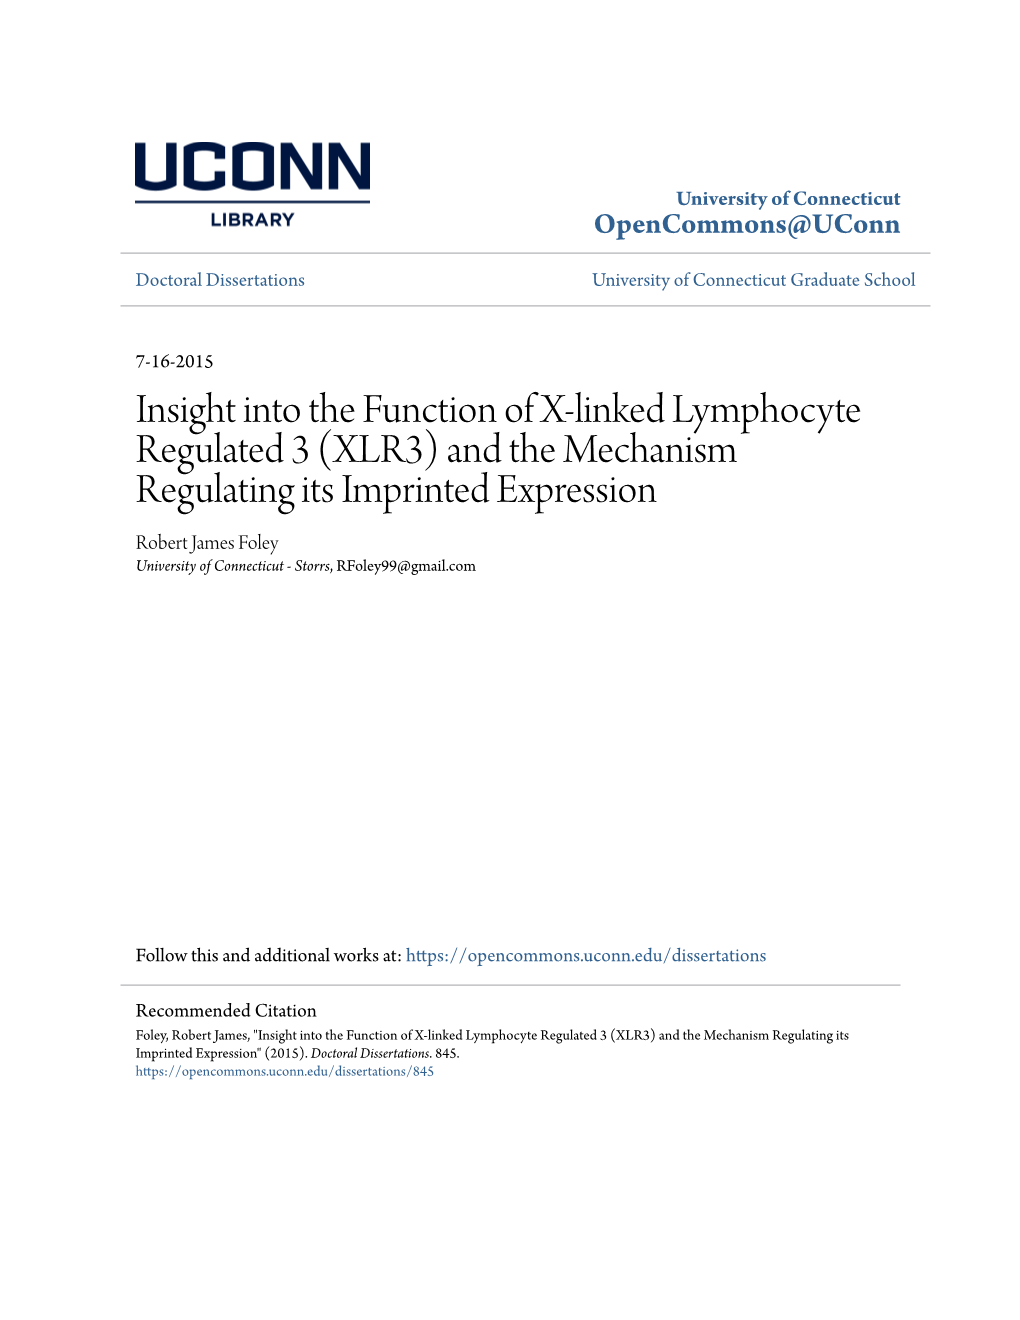 Insight Into the Function of X-Linked Lymphocyte Regulated 3 (XLR3)